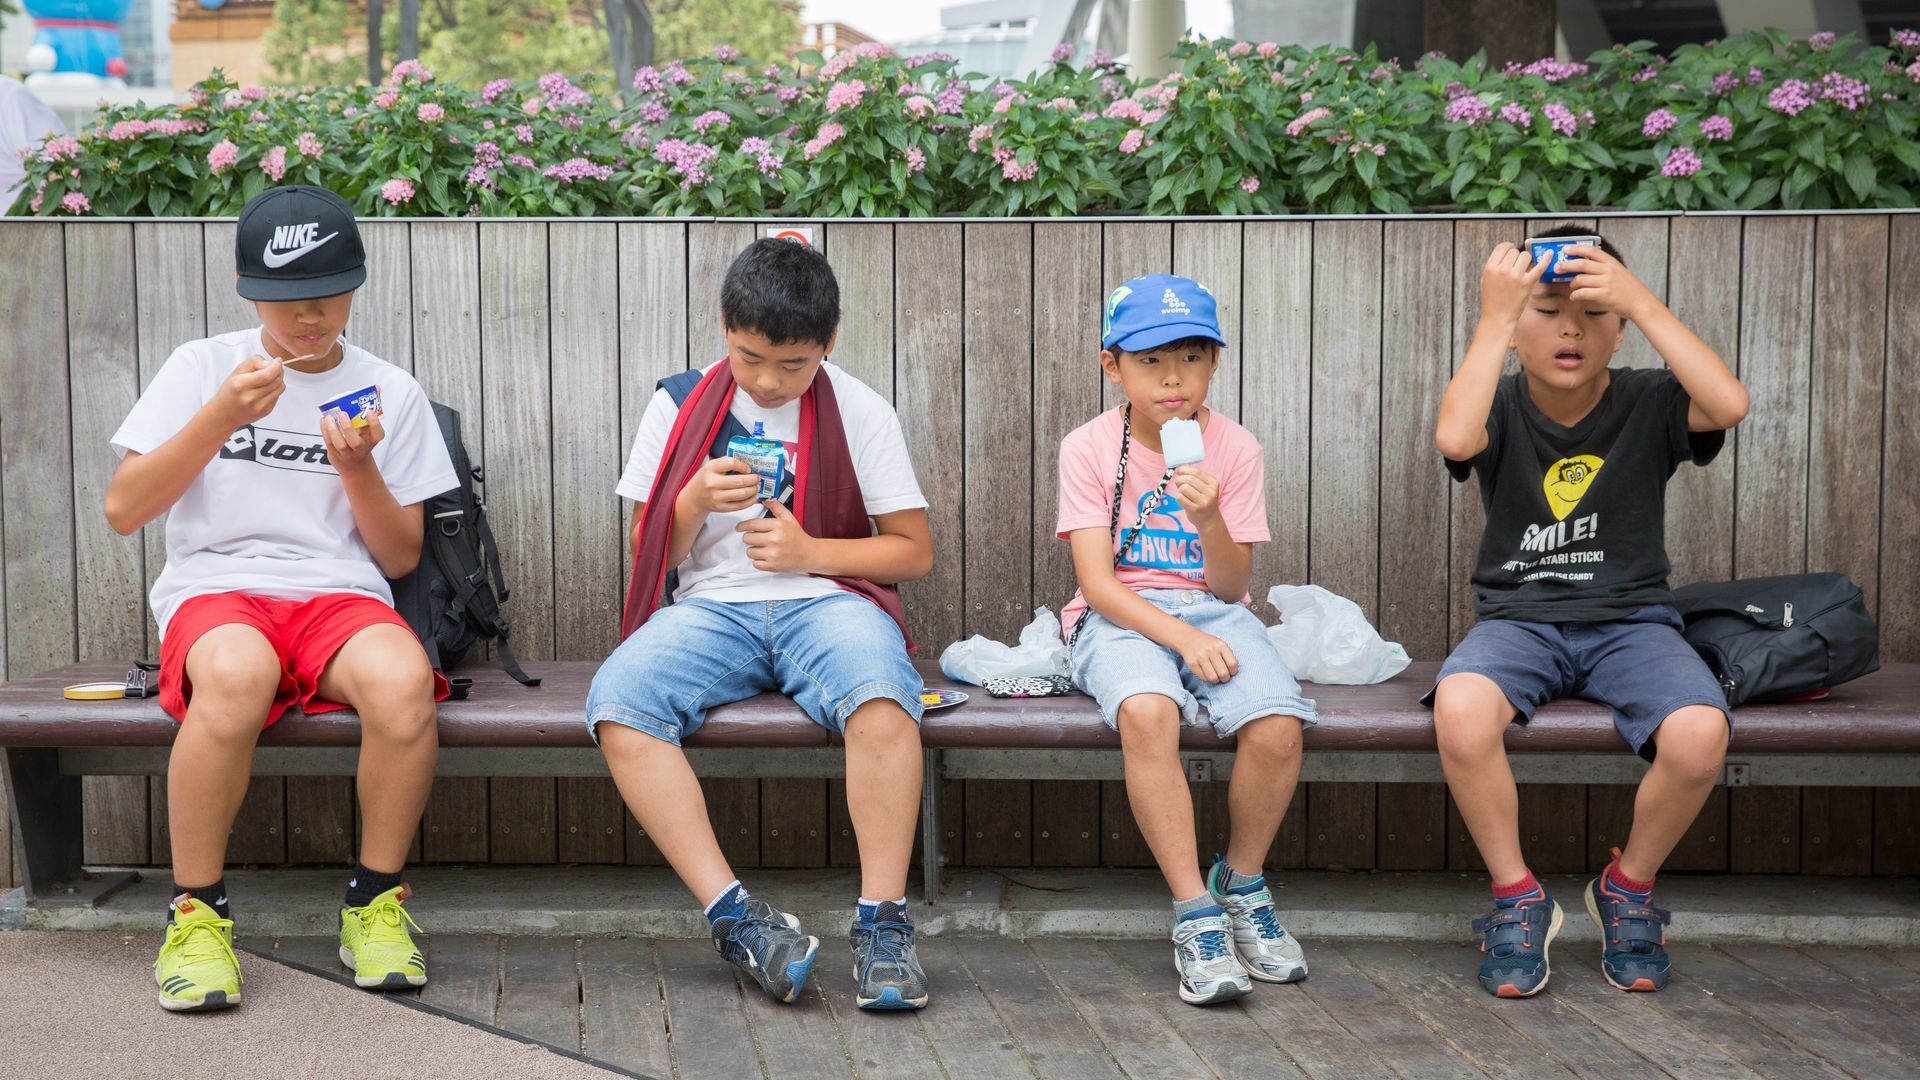 Children eat ice creams as they try and keep cool on July 22, 2018 in Roppongi, Tokyo, Japan.